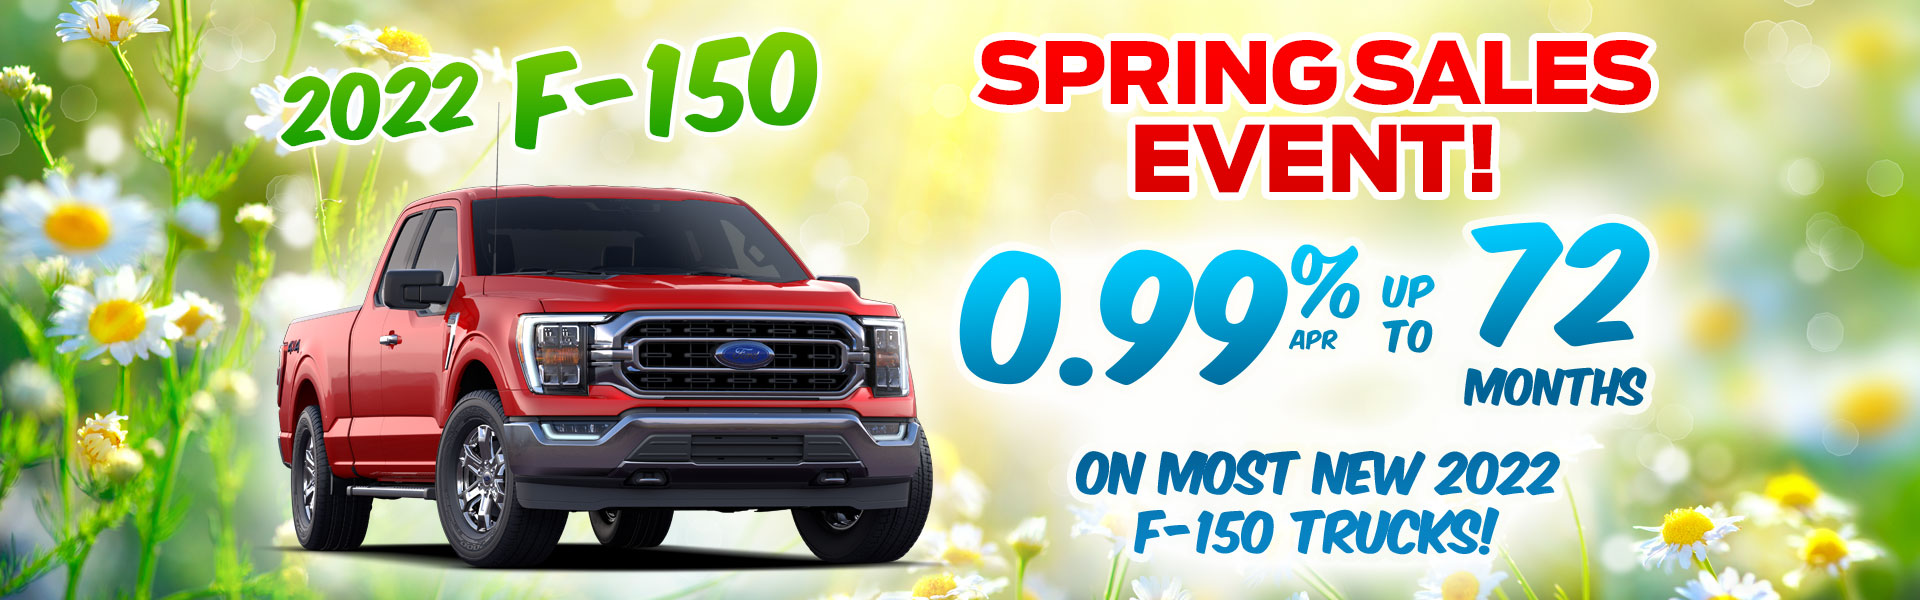 2022 Ford F-150 Spring Sales Event